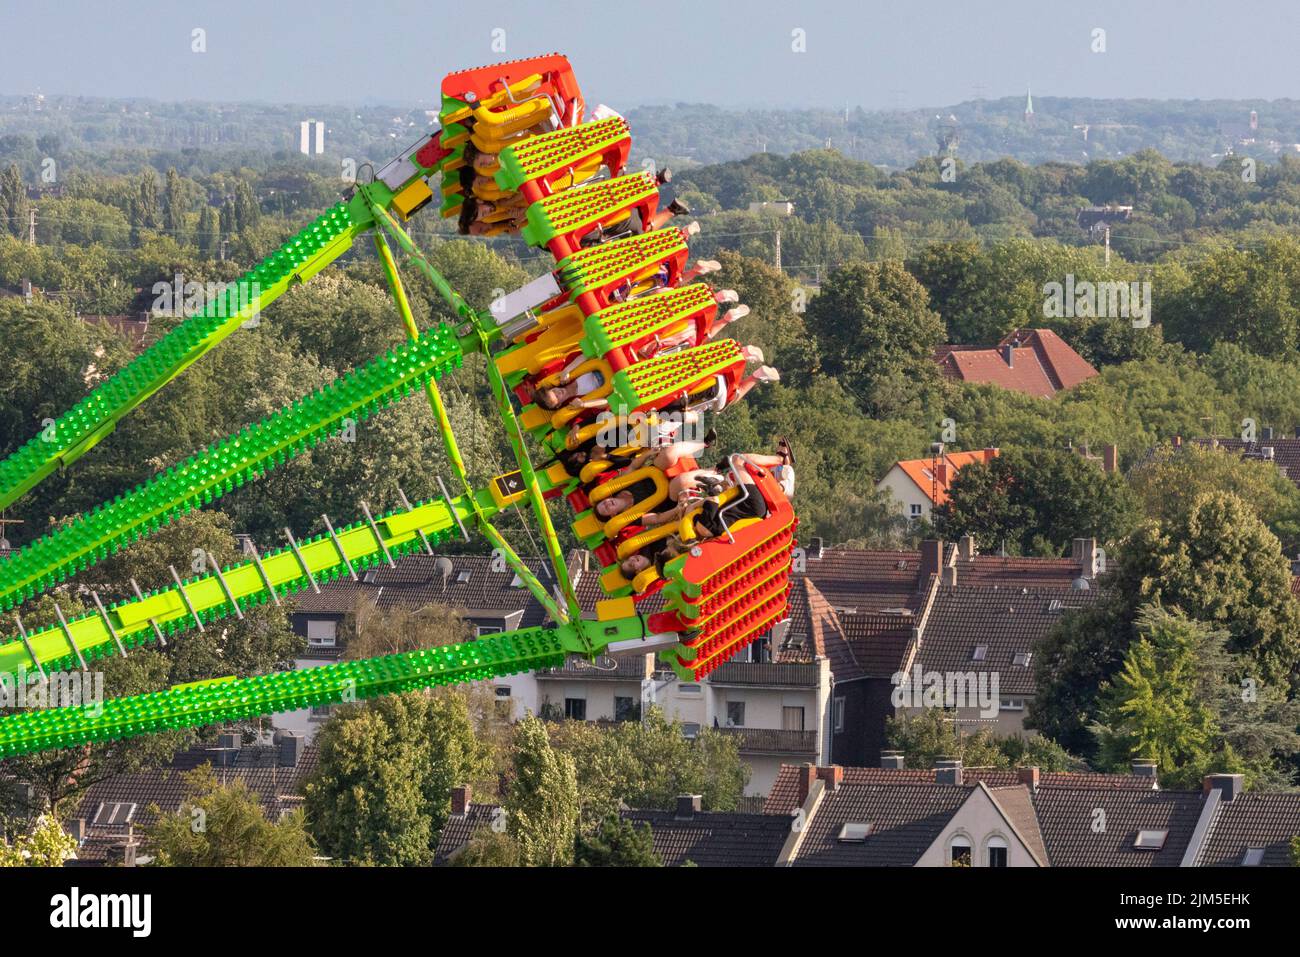 Cranger Kirmes, Herne, NRW, Germany, 04th Aug 2022. People on the 'Konga' ride high above Herne. Visitors enjoy the many attractions, roller coasters, beer halls, carousels and more at the Cranger Kirmes fun fair soft opening ahead of the official opening ceremony tomorrow. This is the first time it takes place since Covid restrictions took hold in 2020. The third largest fun-fair in Germany, and largest in Germany's most populous state NRW, usually attracts 4m  visitors over 10 days. It has a long tradition with fairs having taken place on the site since the early 18th century. Stock Photo